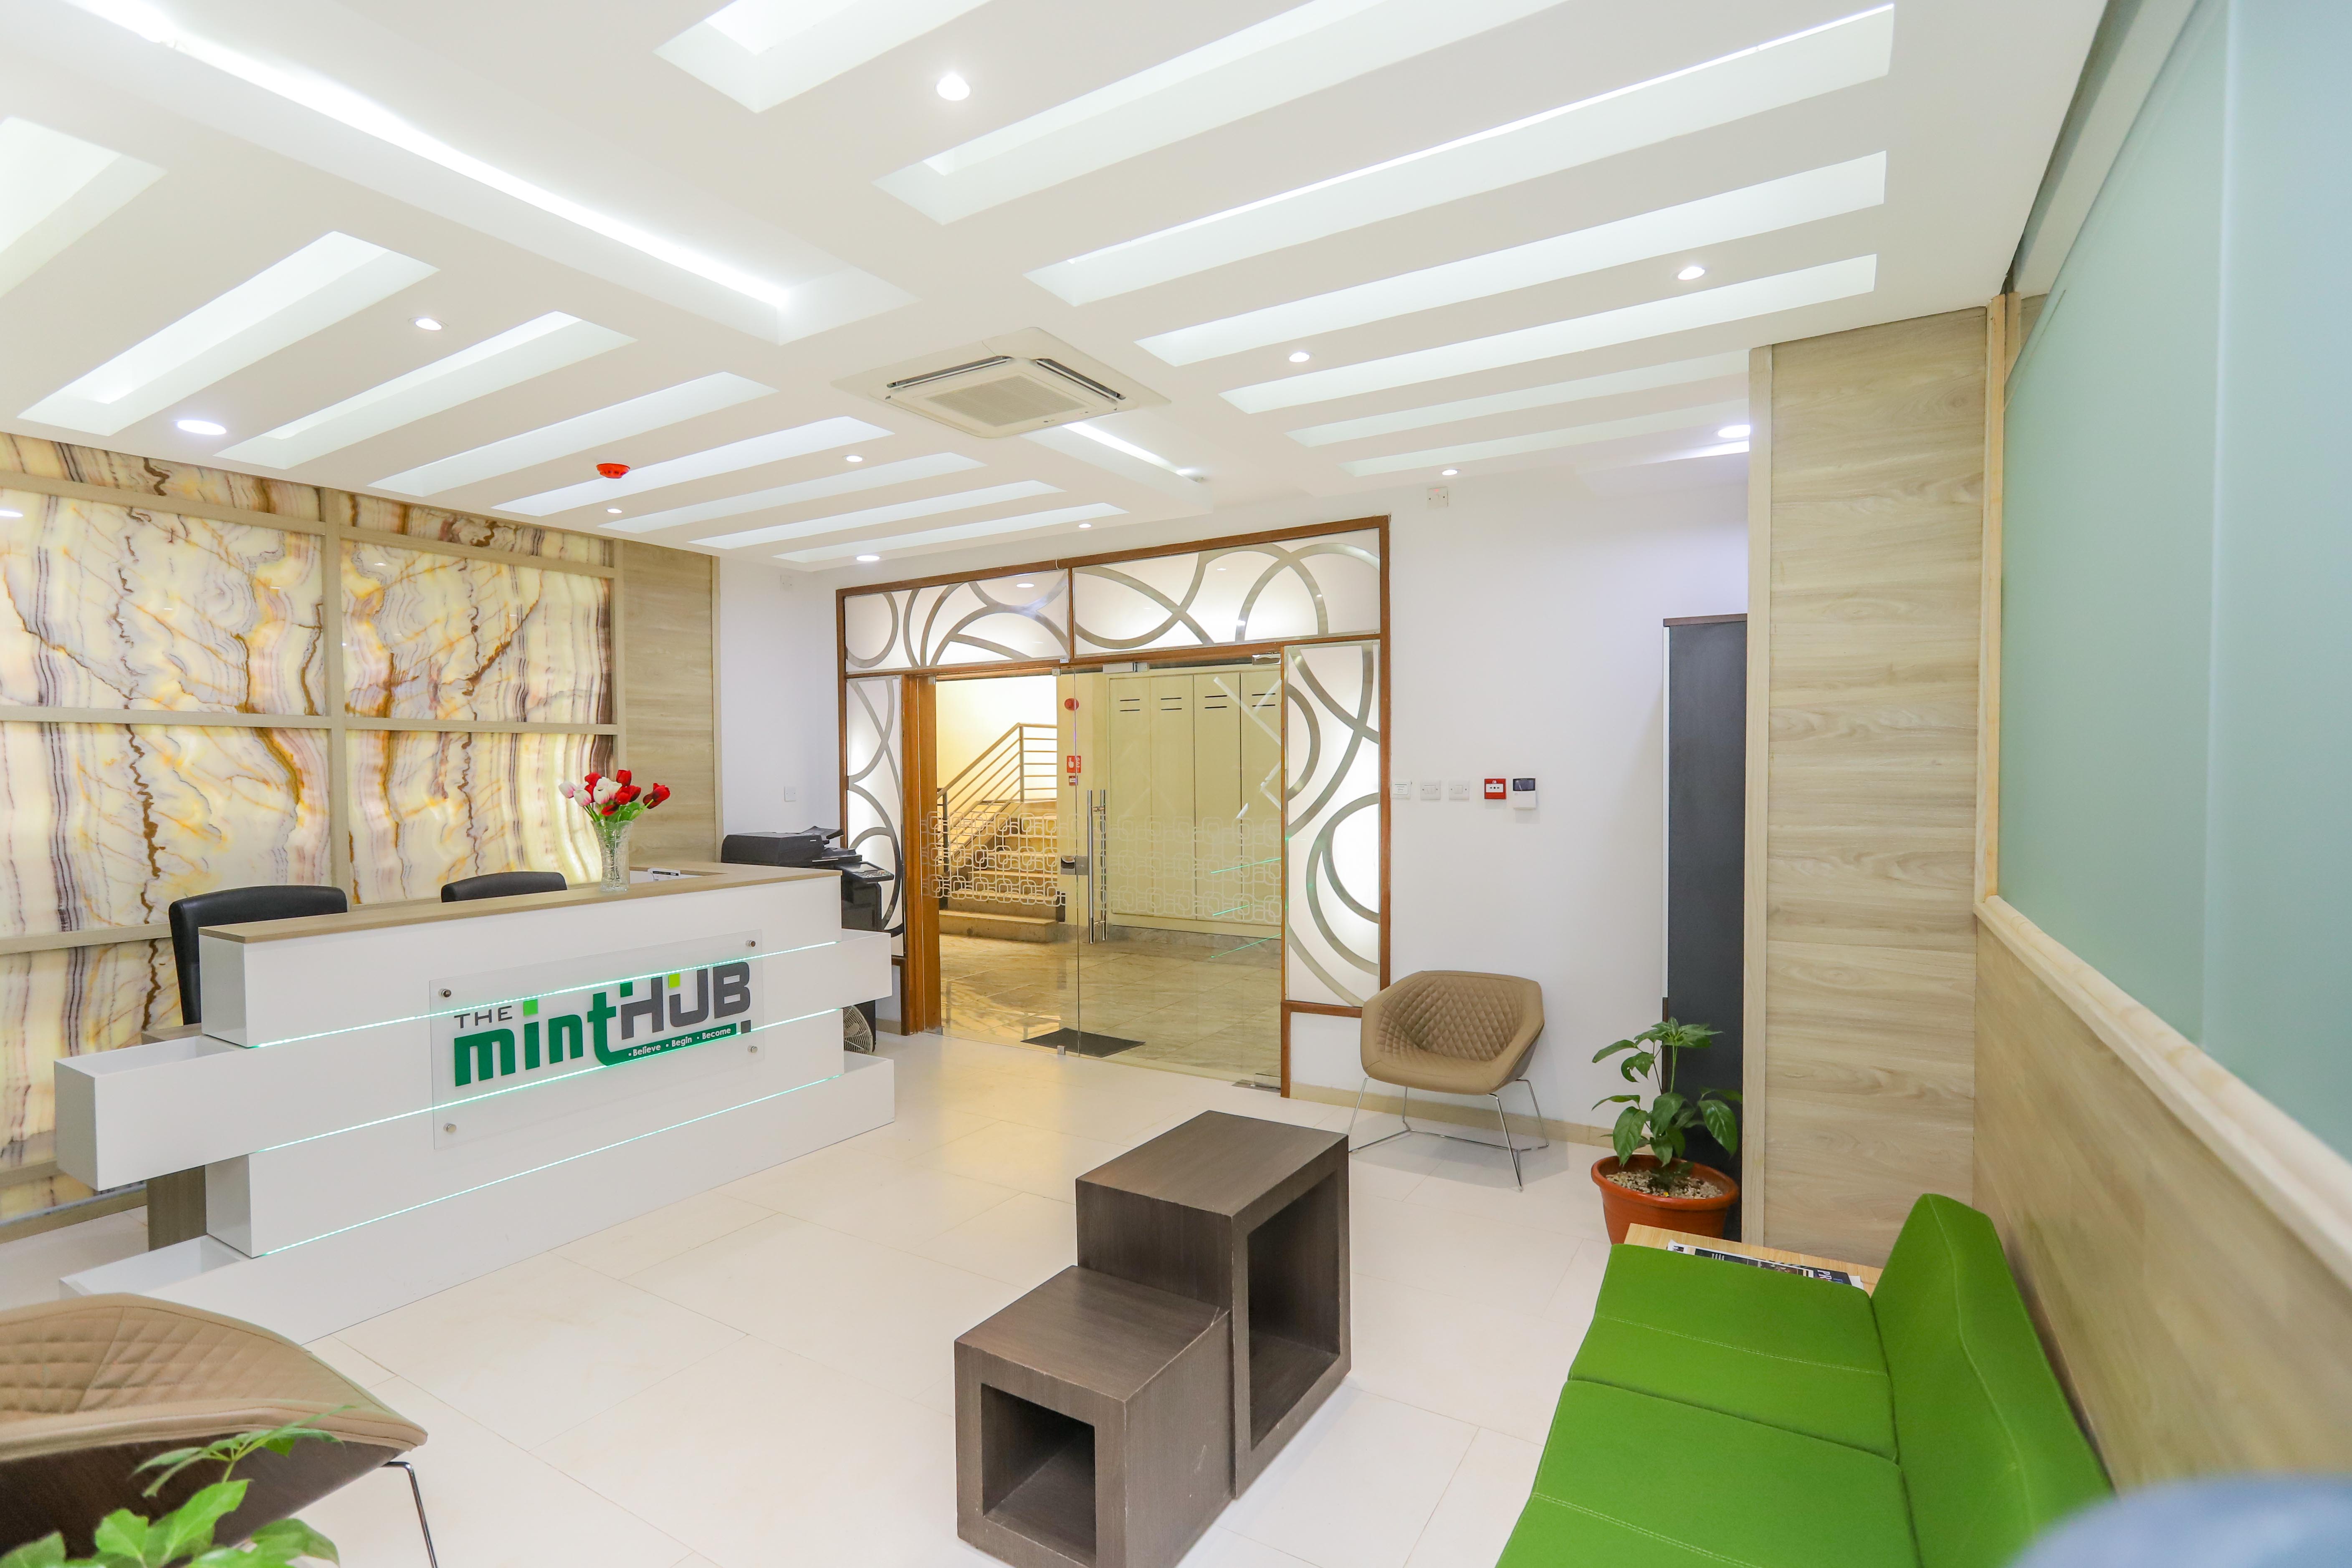 the minthub front office reception area